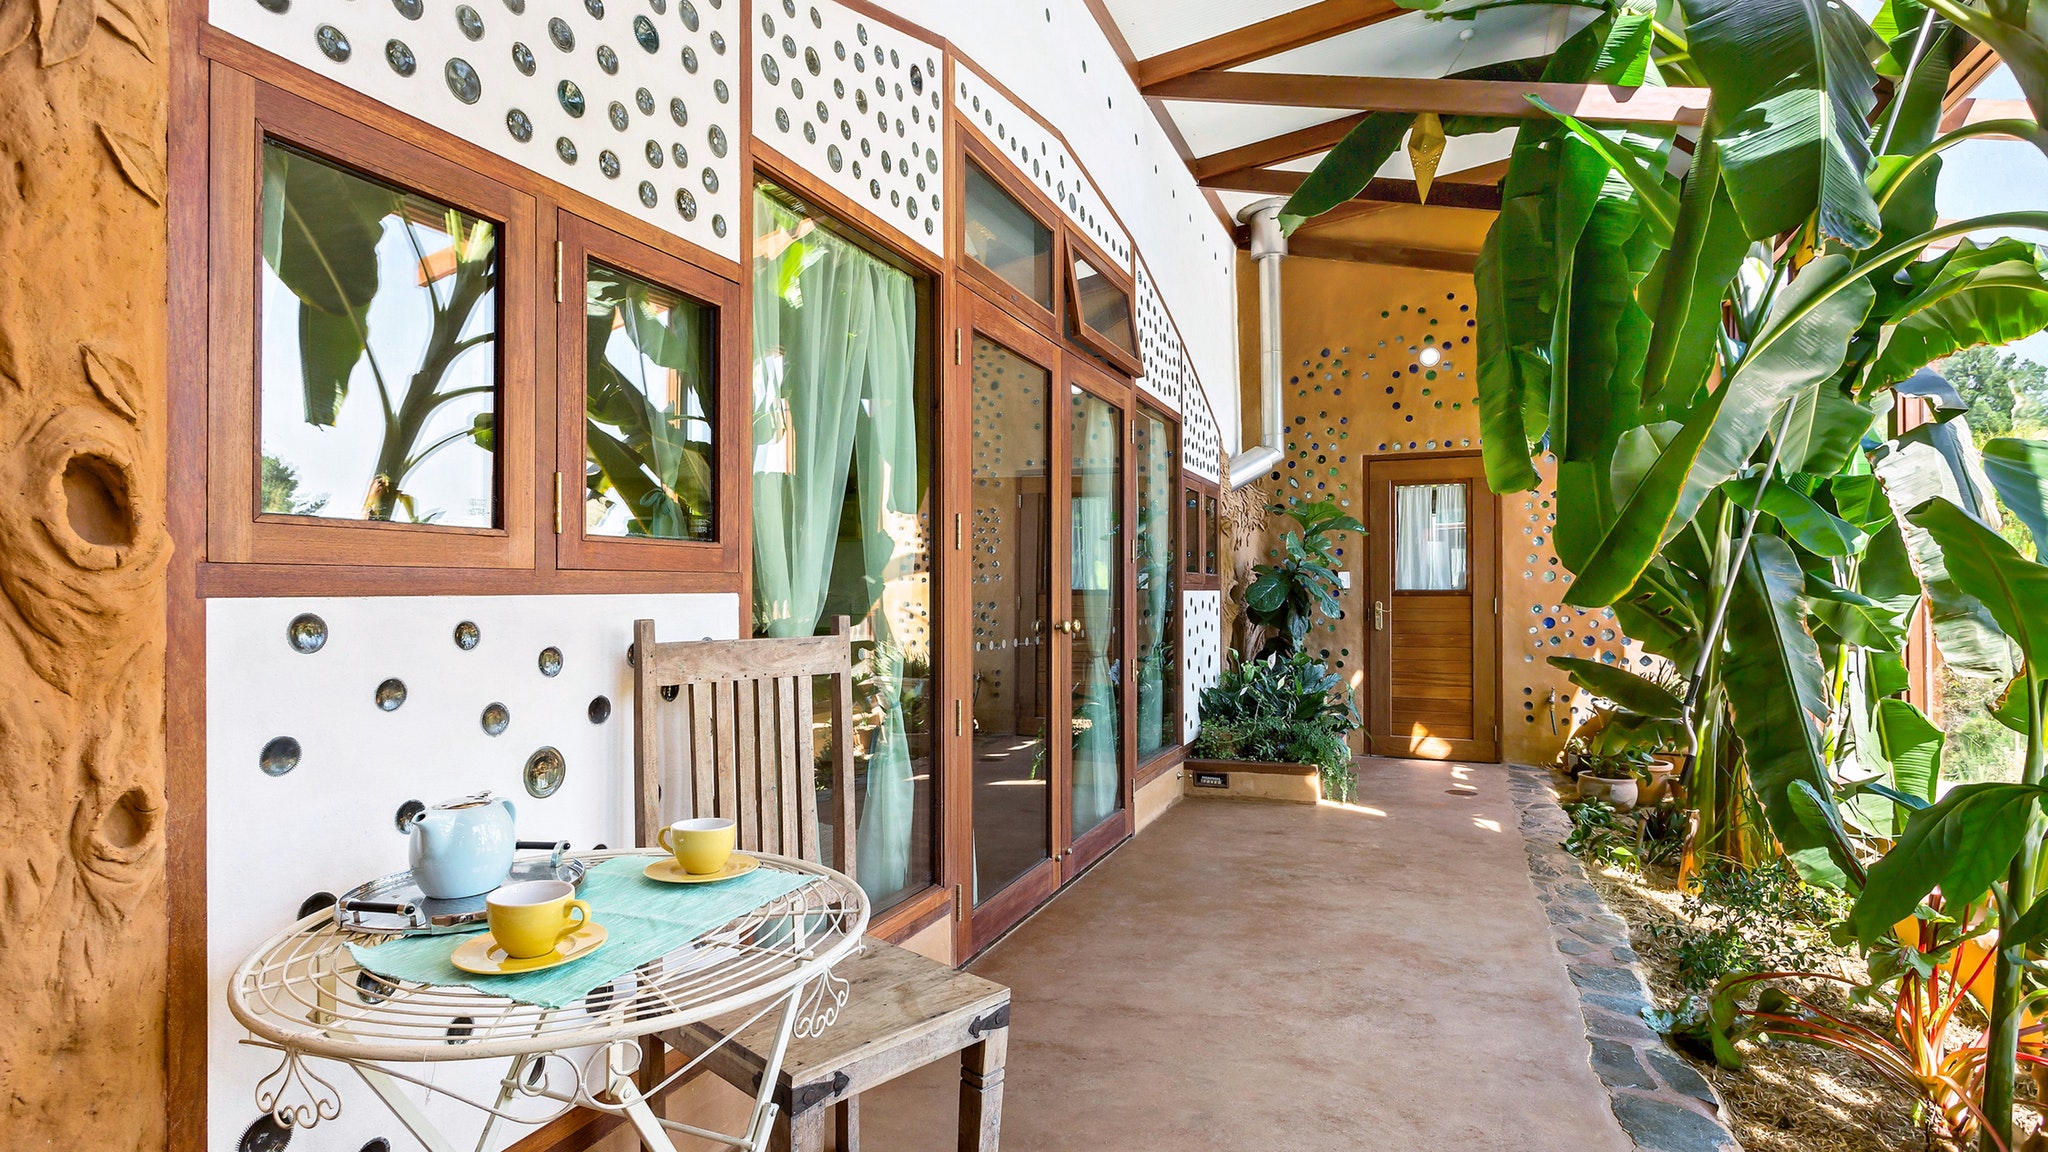 Earthship Ironbank - Accommodation in Surfers Paradise 0